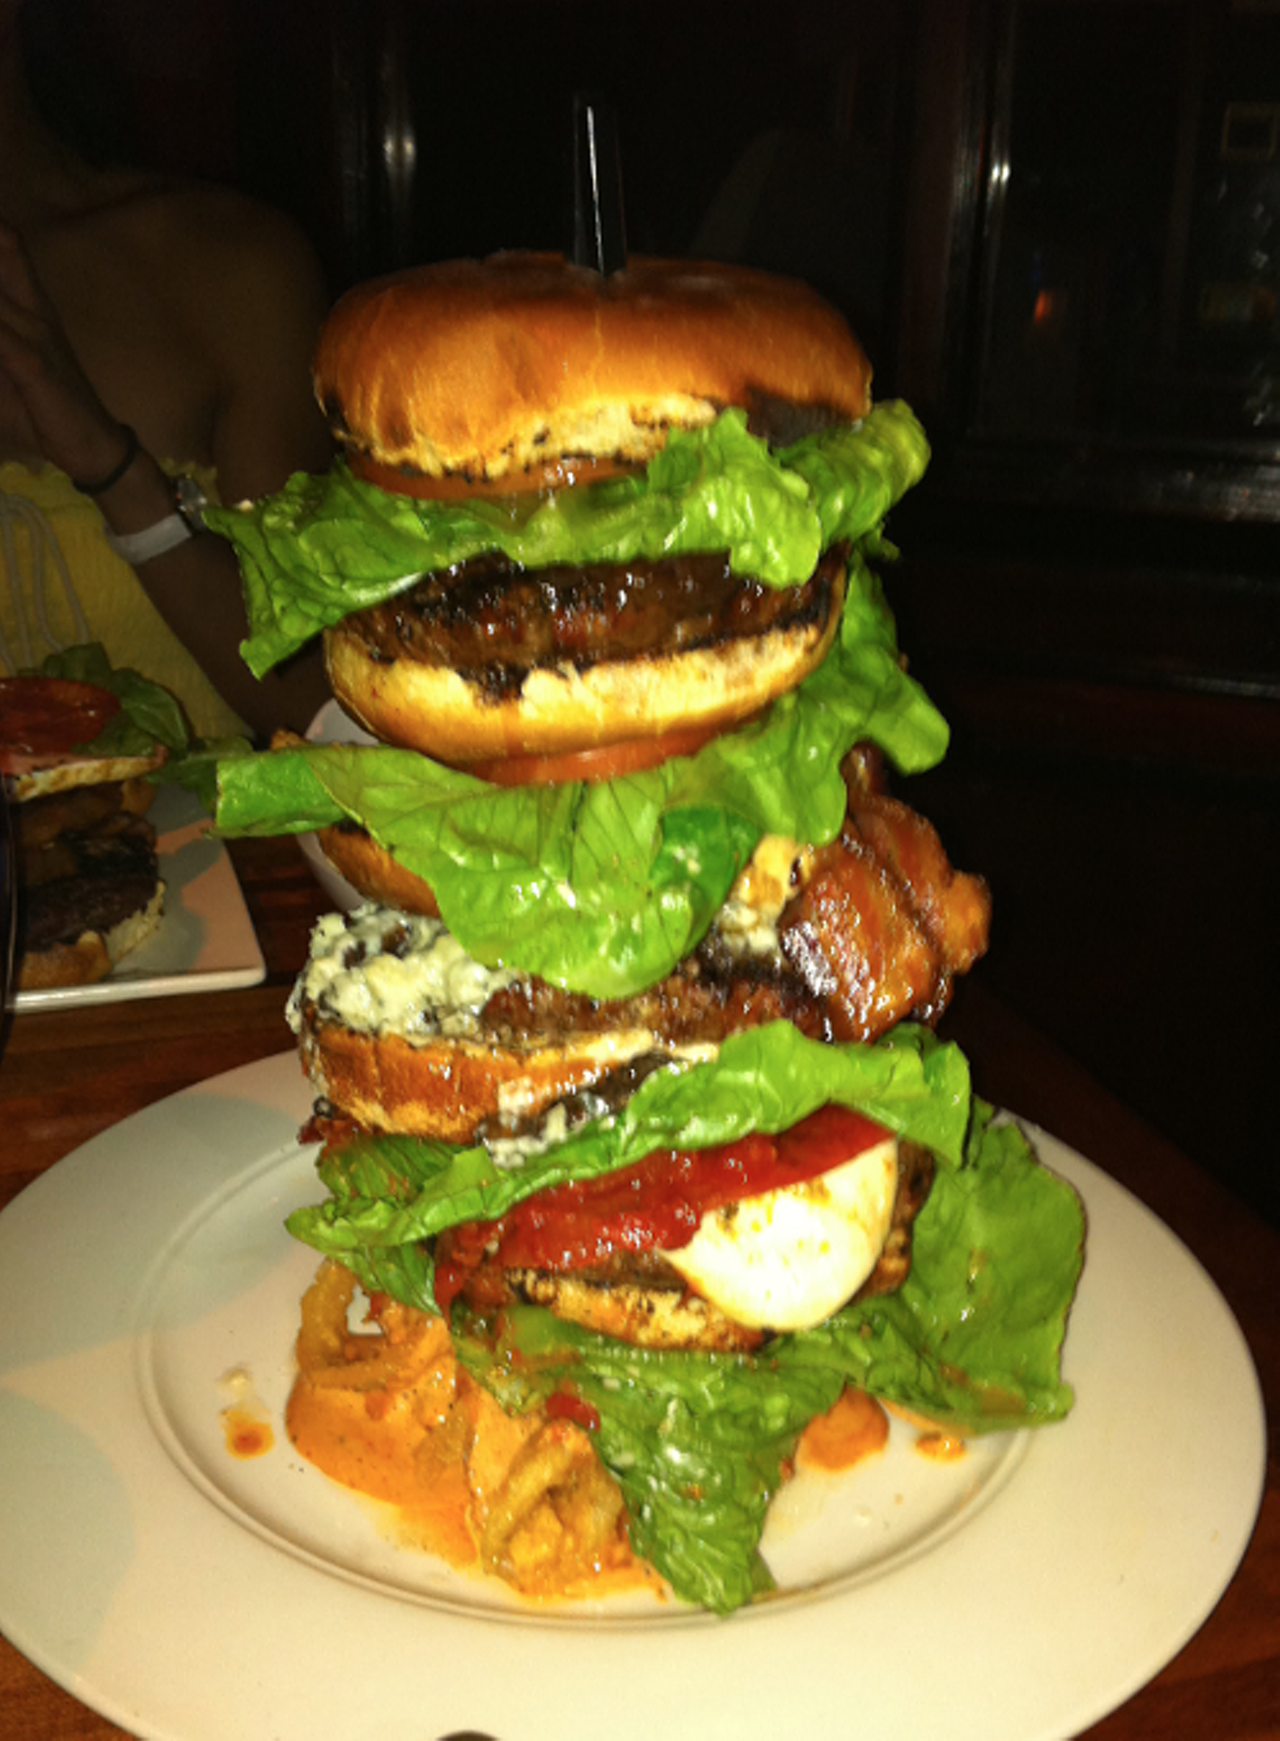 Where: Touch Supper Club - 2710 Lorain Ave Ohio City
Challenge: If you are adventurous, you can attempt this burger behemoth. It is free if you finish, or $30 if you fail. First is the tower of beef comprised of 3 lbs. of meat with three complete buns, and a variety of toppings that switch every Tuesday. If you even get past the burger, you must also scarf down the side of frites, plus a draft beer.
Prize: Bragging rights
Cost: $30 or free if you finish